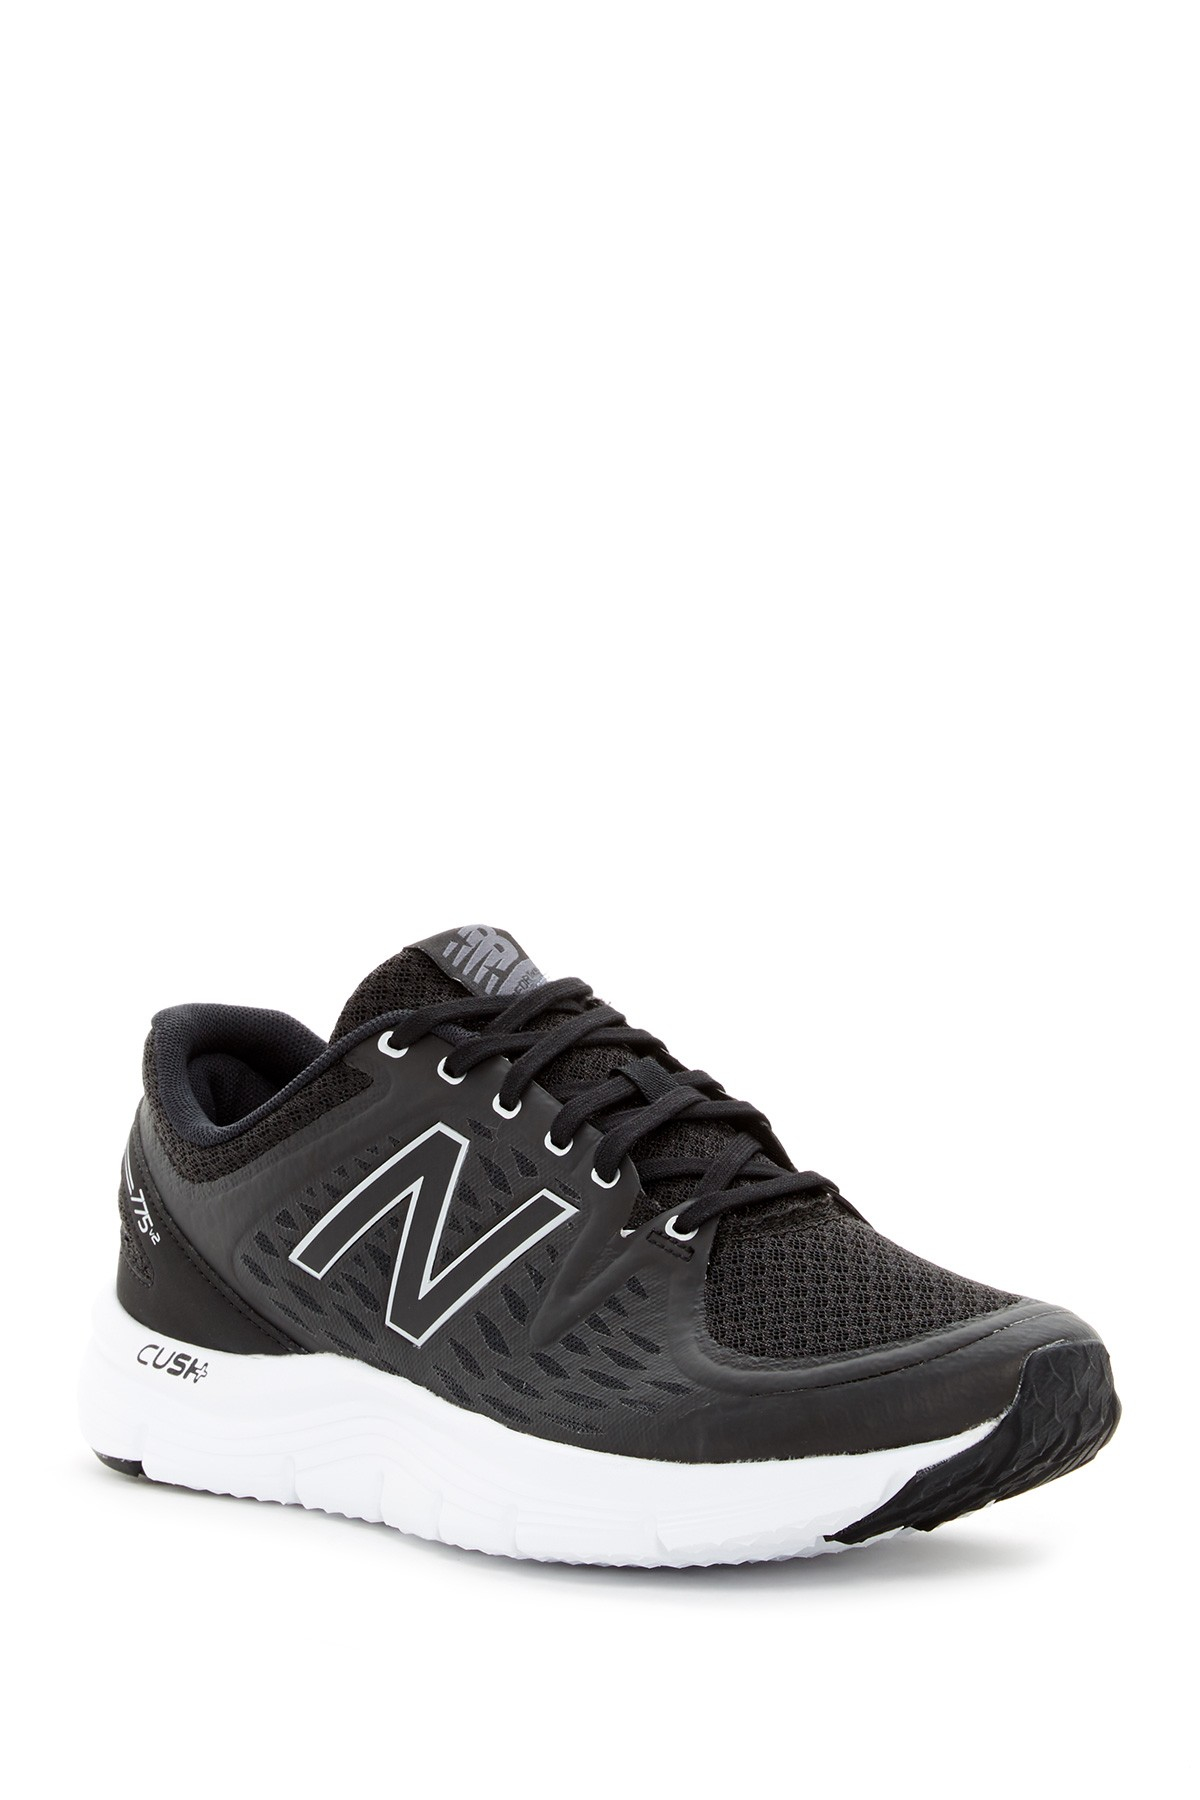 New balance 775 Running Shoe - Wide Width Available in Black for Men | Lyst